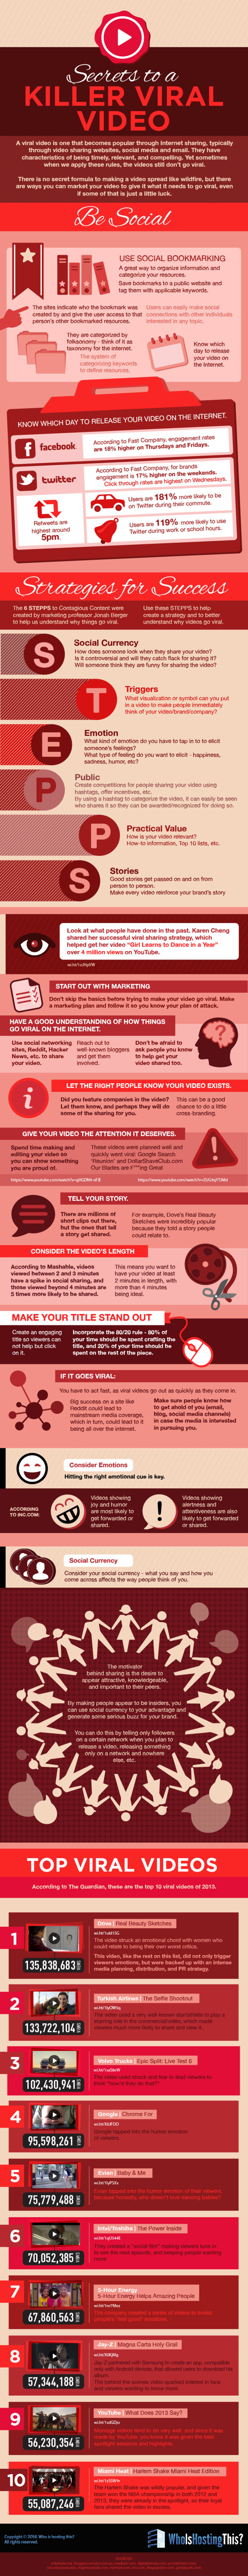 Content Marketing: Secrets To A Killer Viral Video - #infographic - Digital Information World | The MarTech Digest | Scoop.it